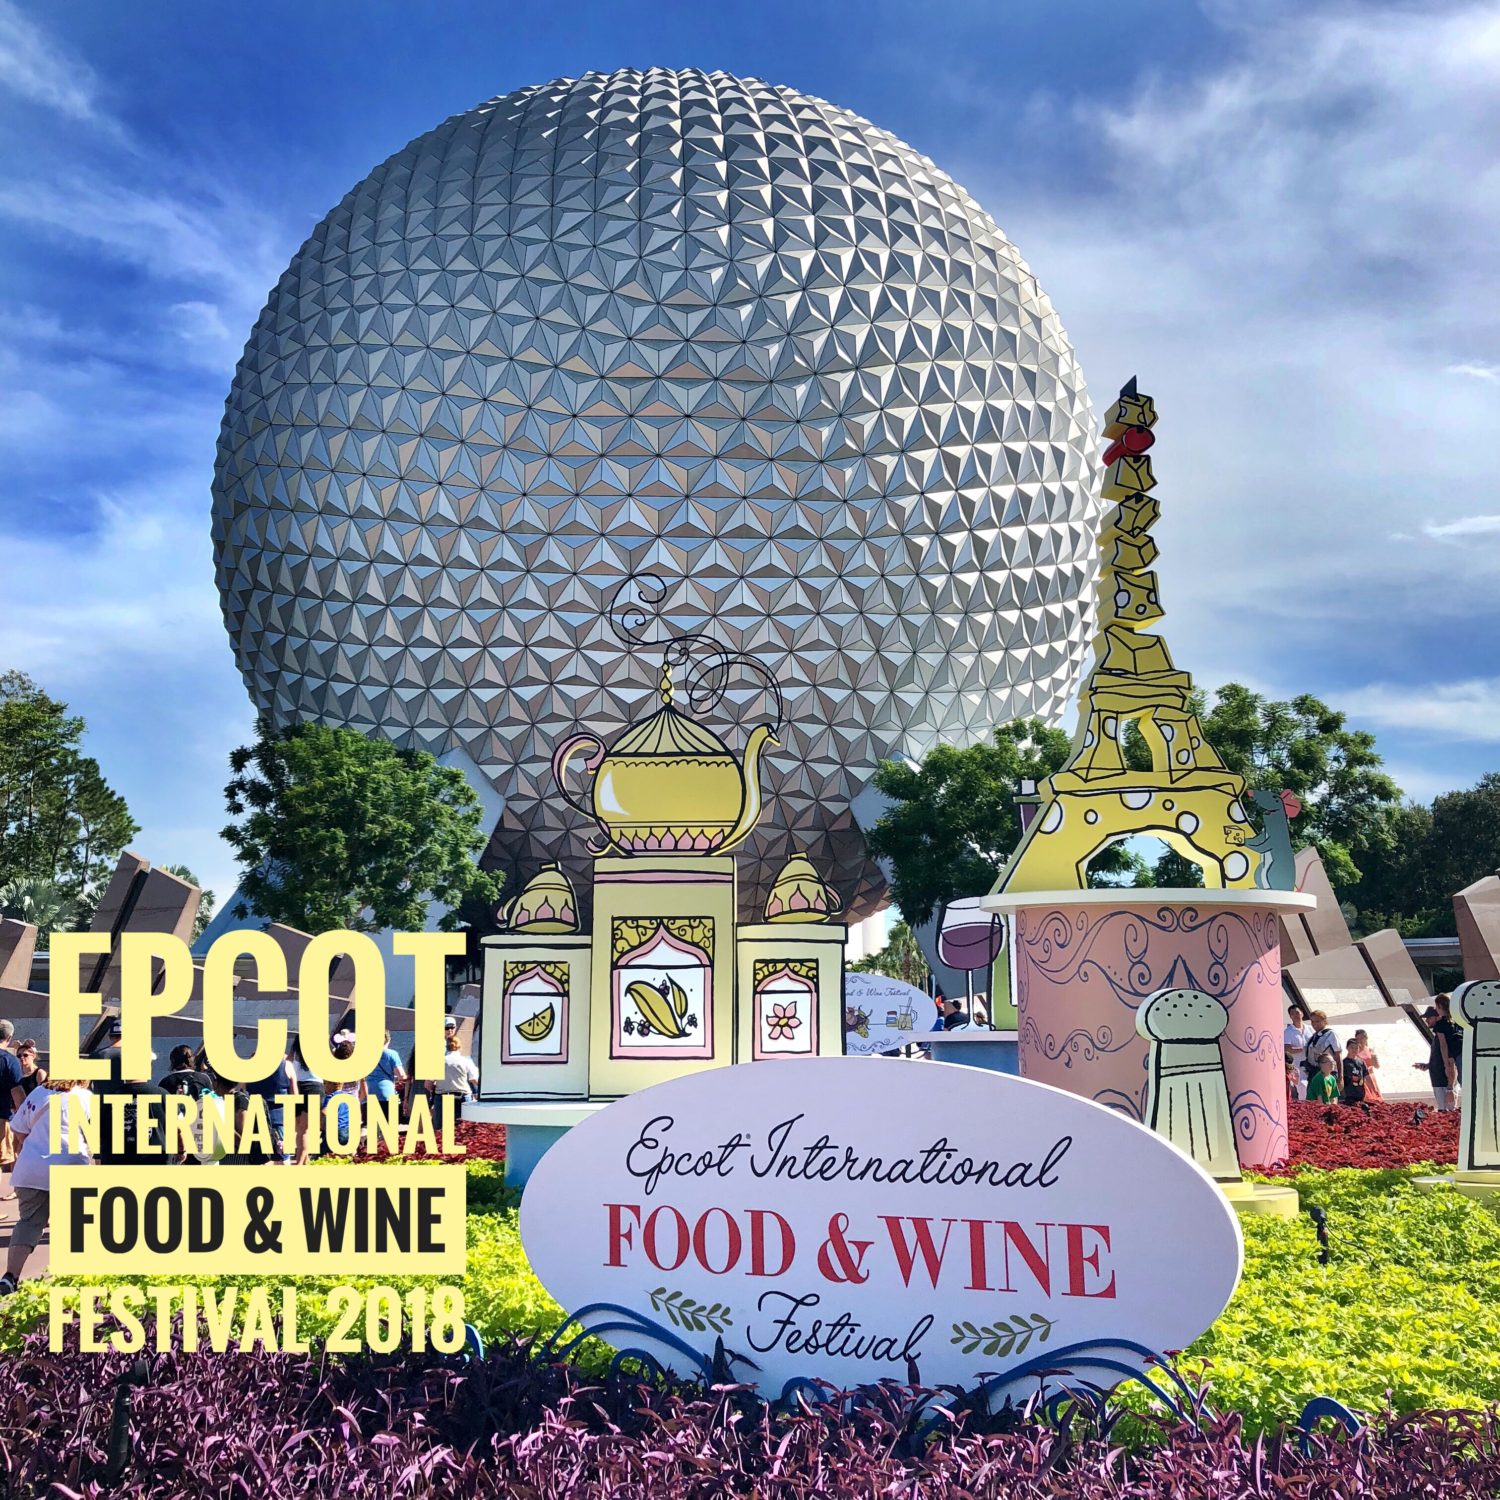 Epcot International Food & Wine Festival 2018 Review